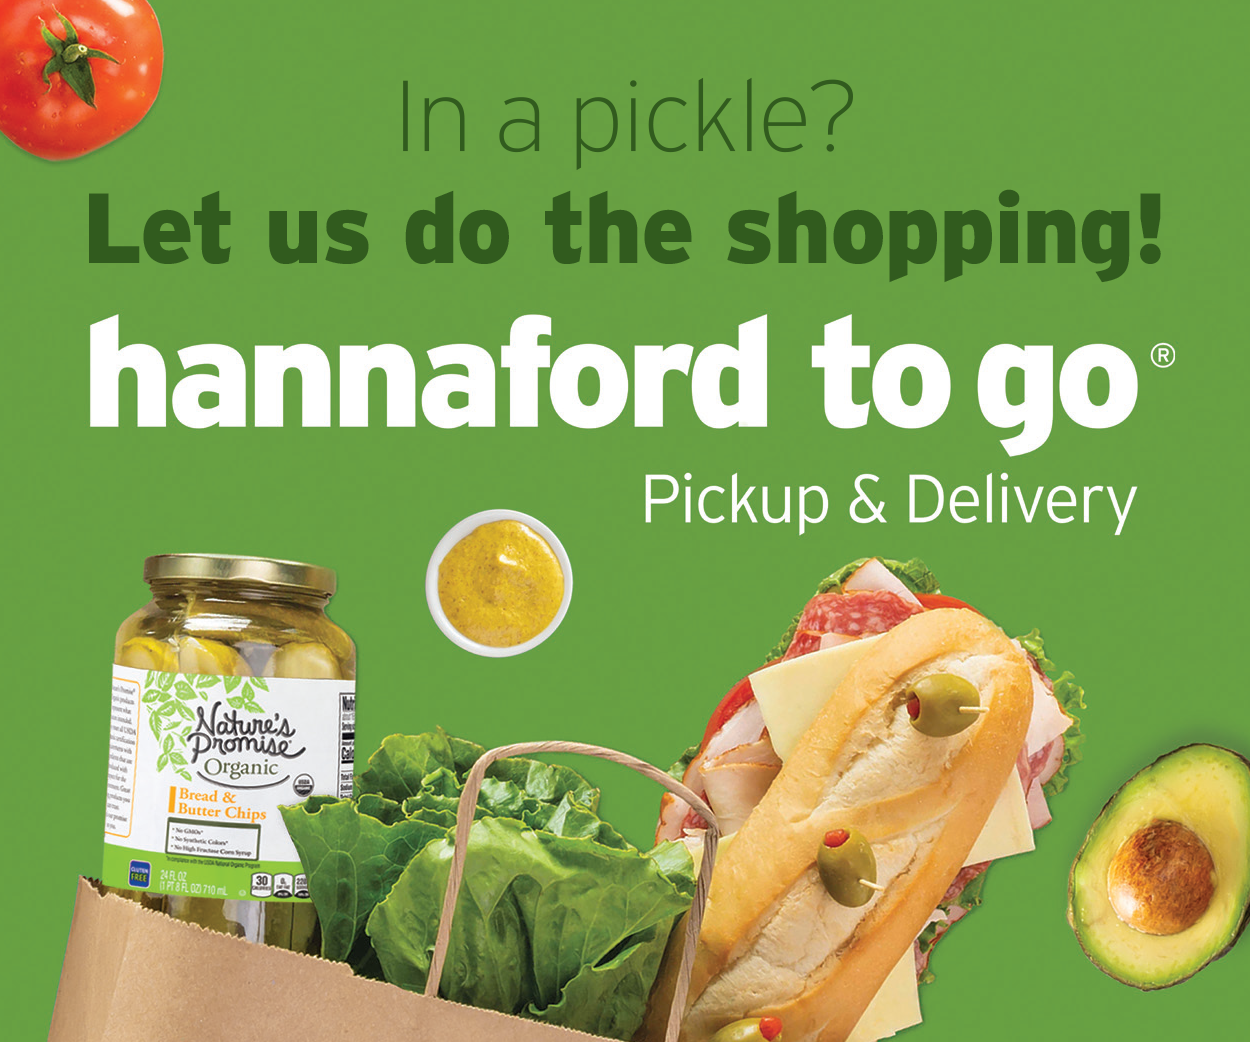 An ad for Hannaford To Go.